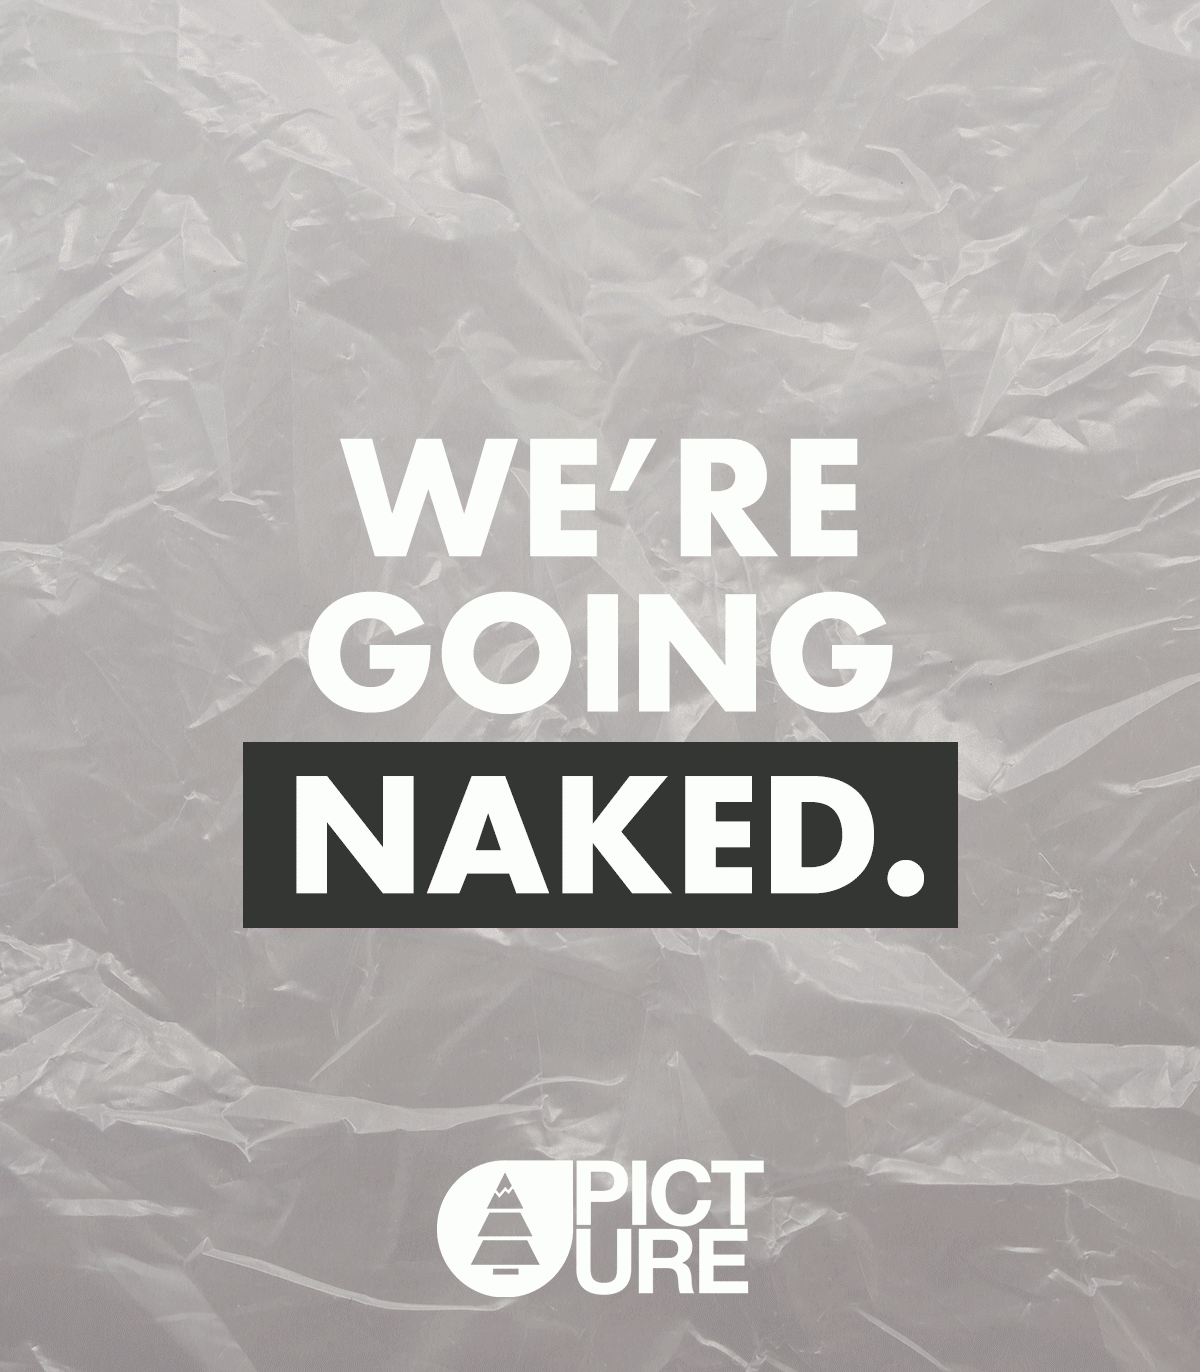 Naked delivery is the way forward.